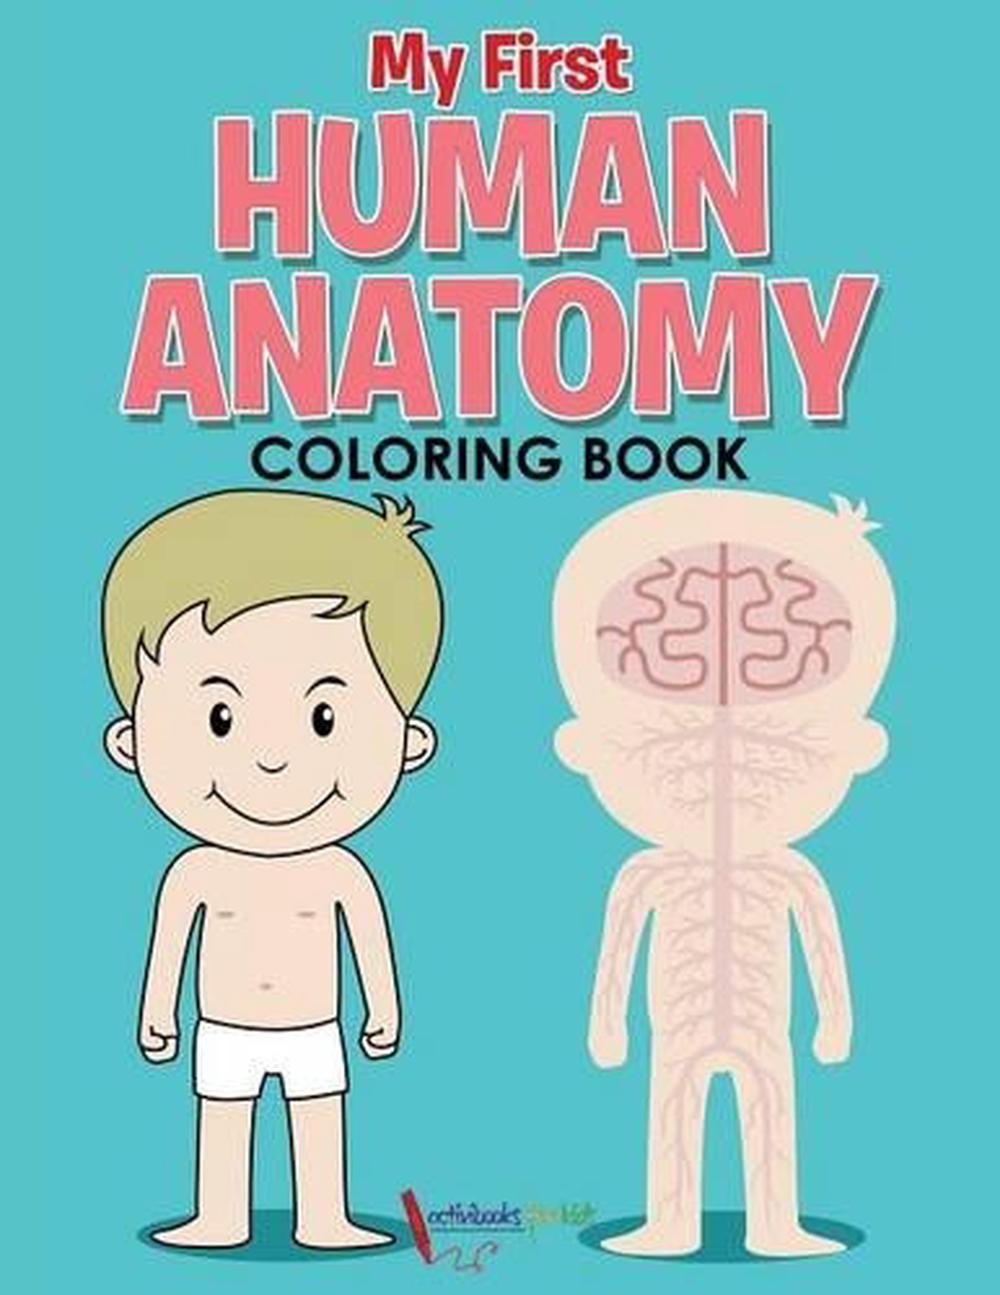 Download My First Human Anatomy Coloring Book by Activibooks For Kids Paperback Book Free 9781683218104 ...